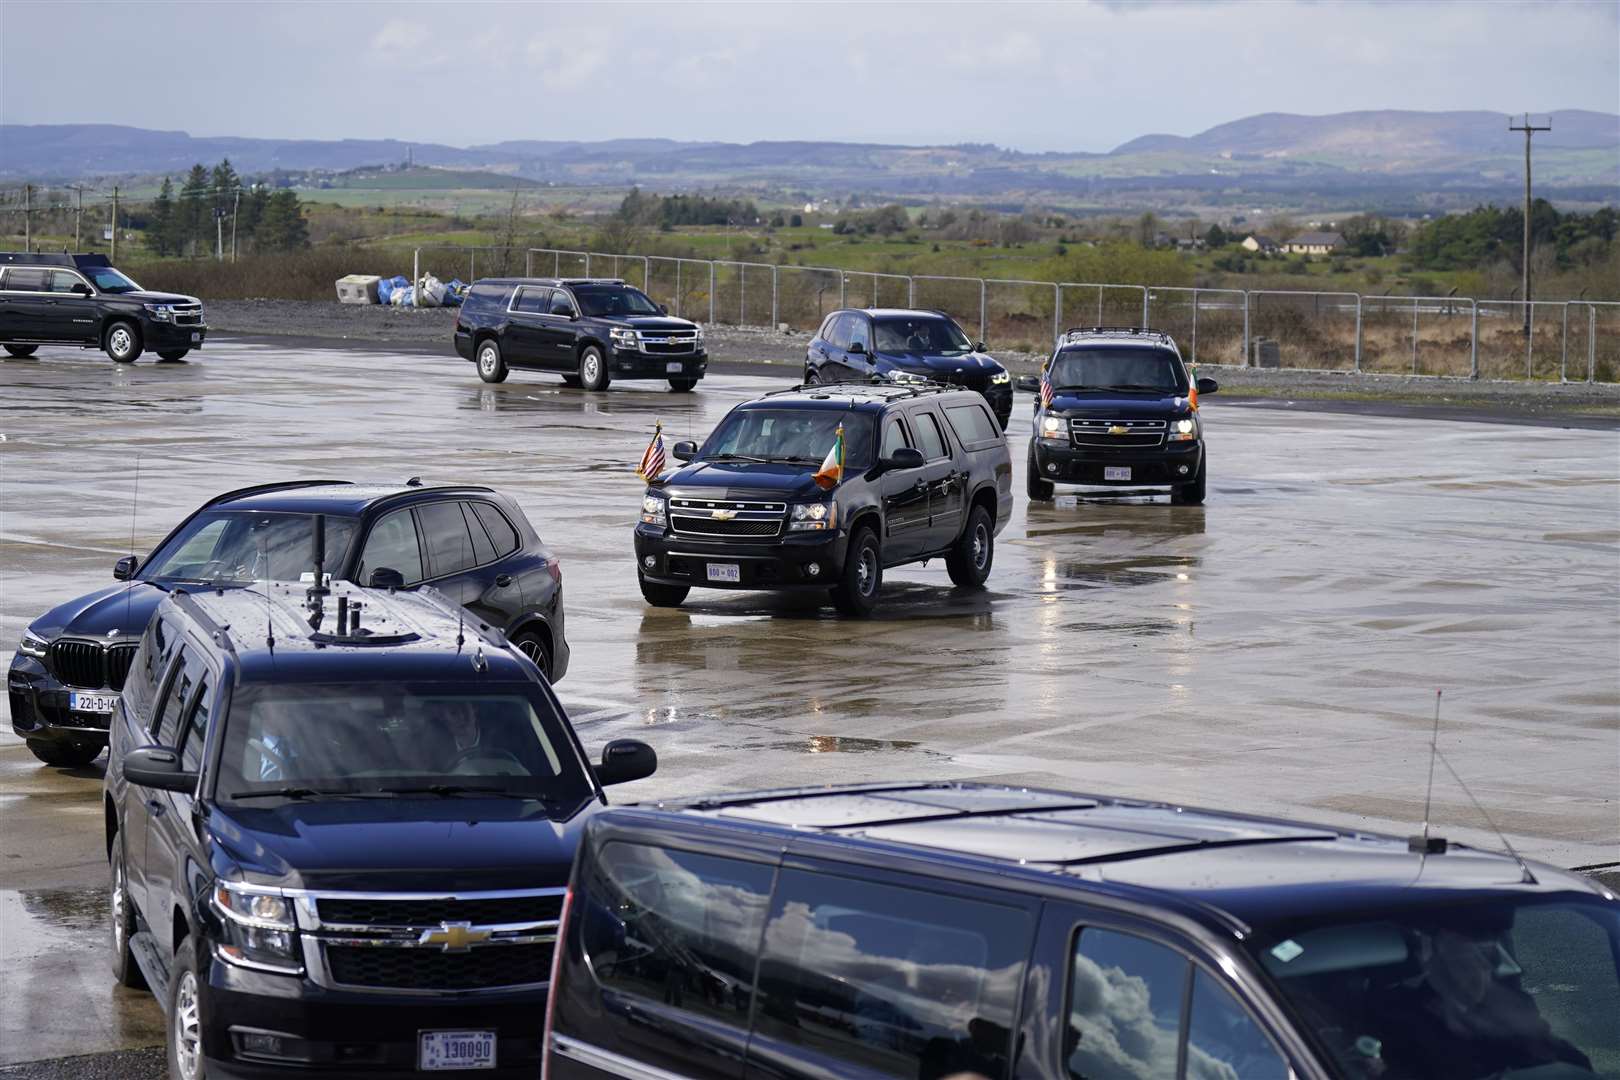 The motorcade carrying Joe Biden departs from Ireland West Airport in Co Mayo (Niall Carson/PA)